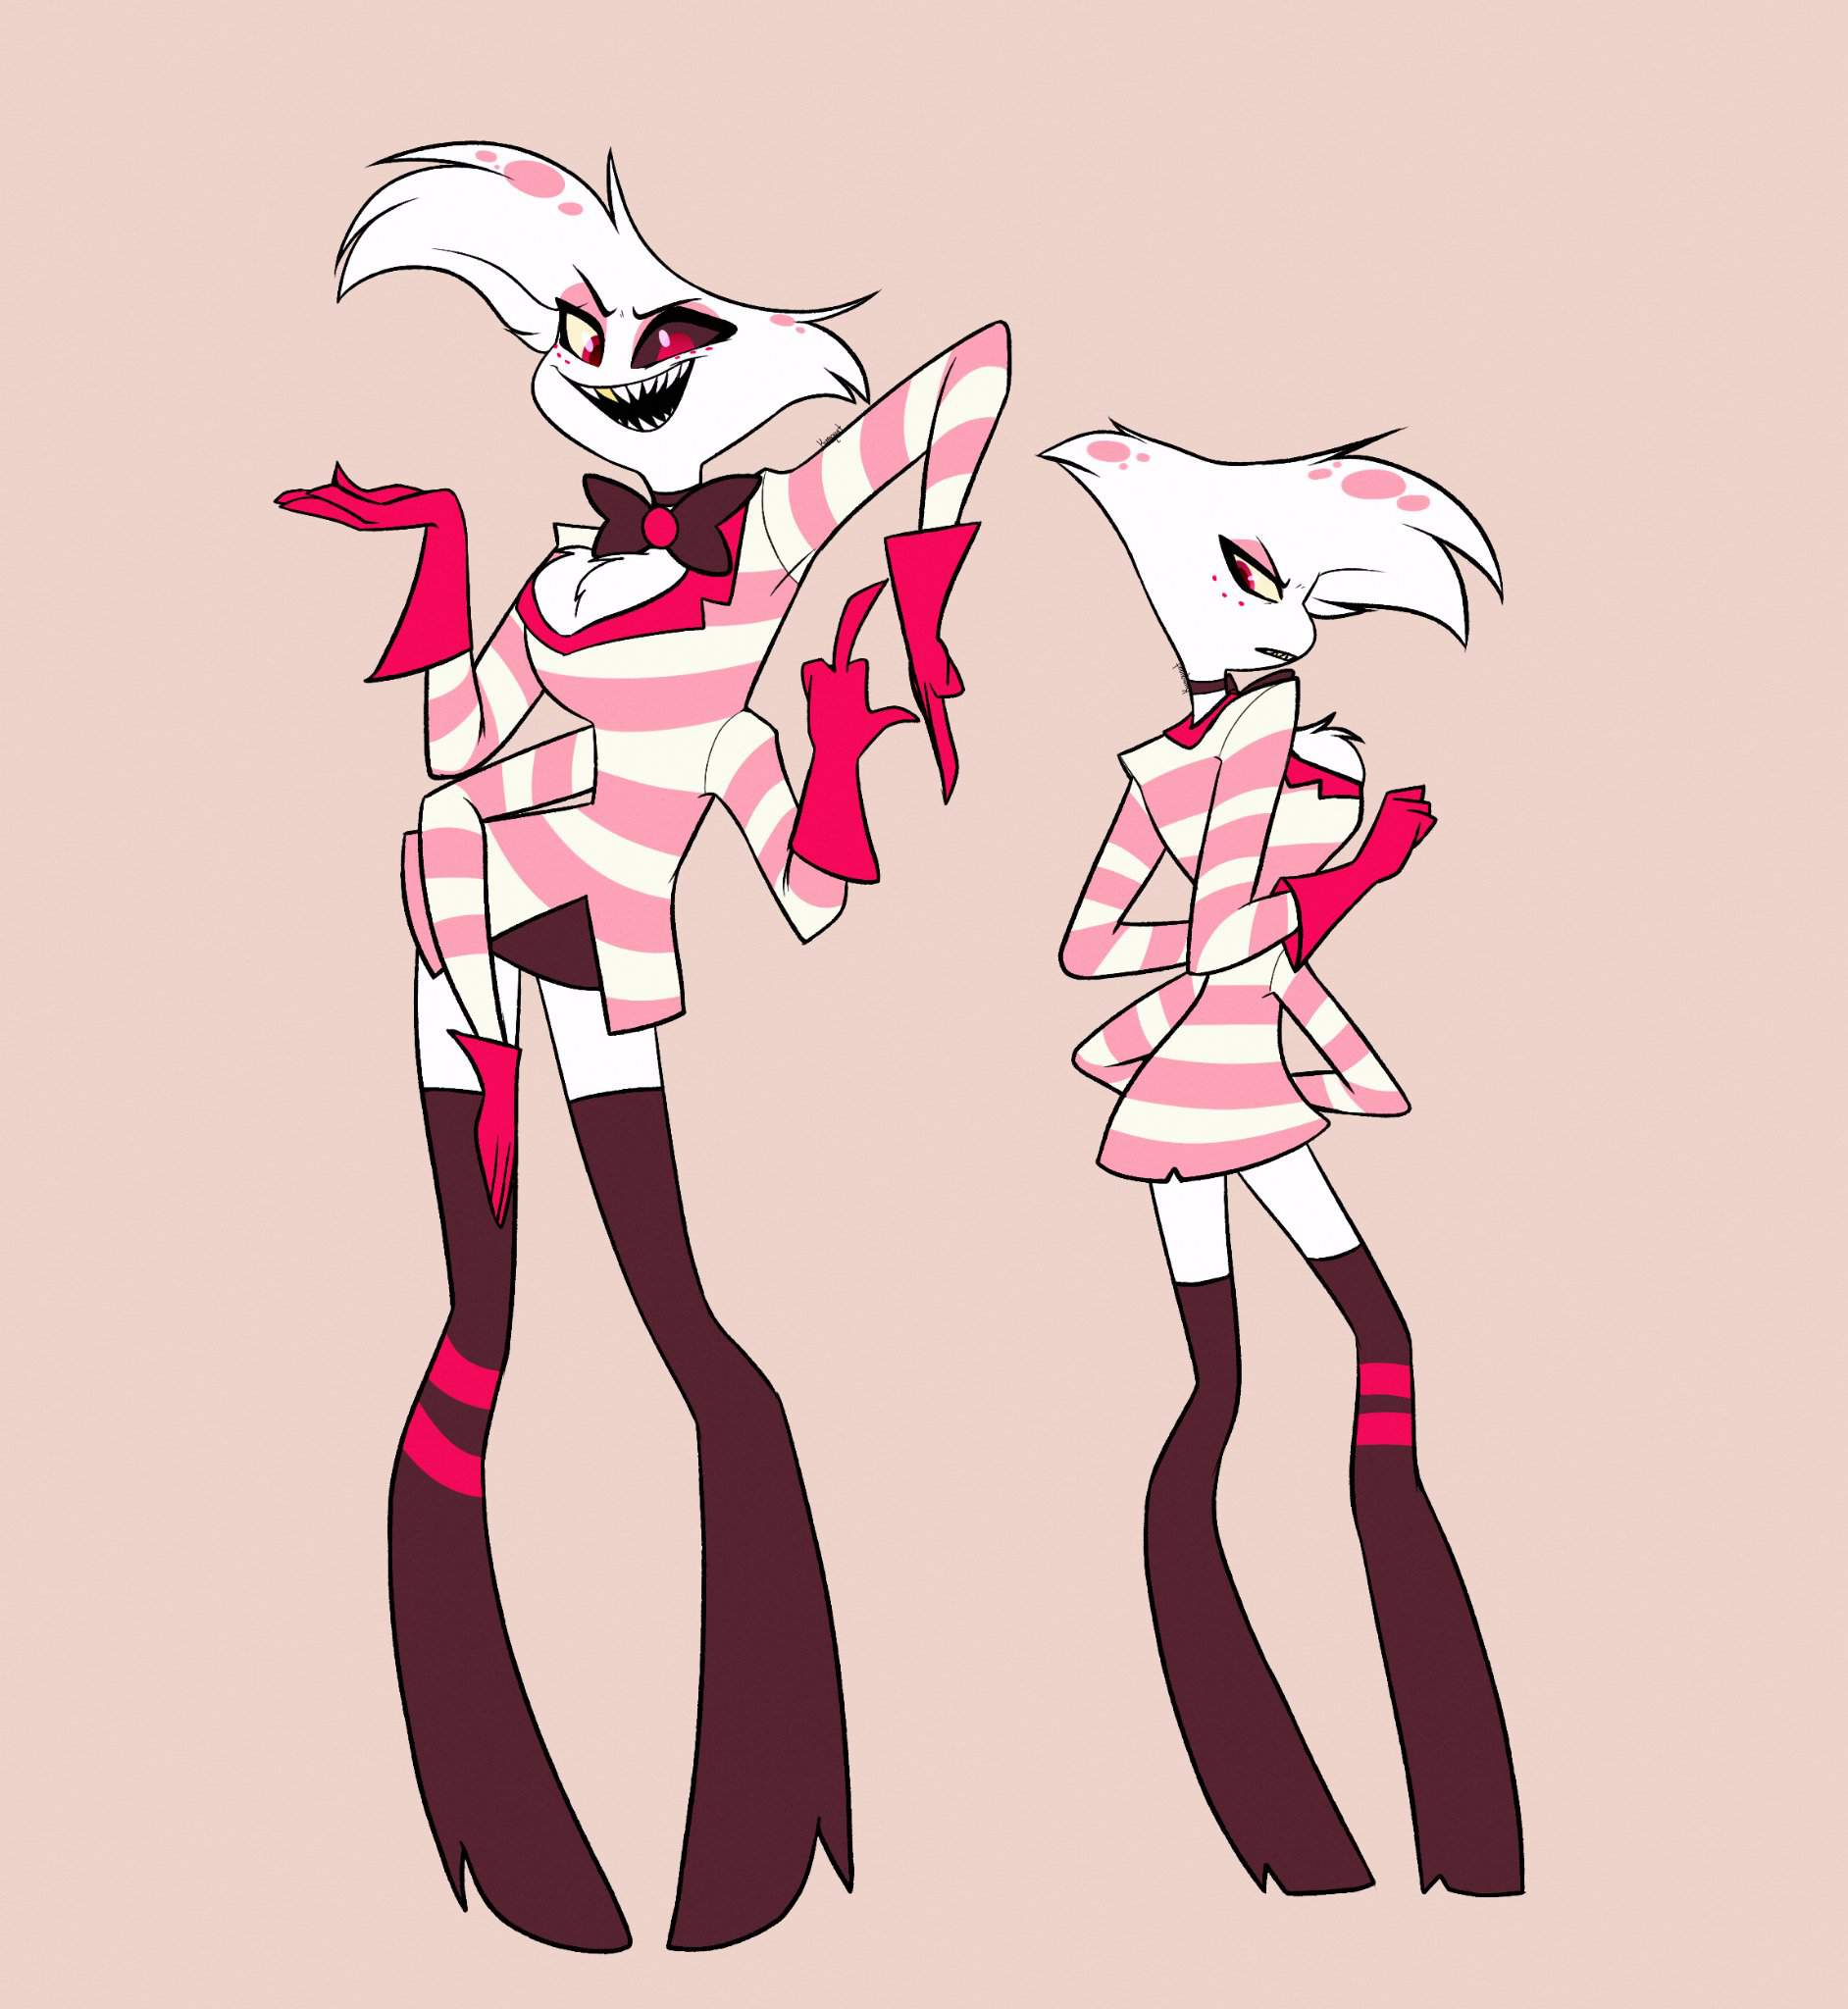 Have some Angel Hazbin Hotel (official) Amino.